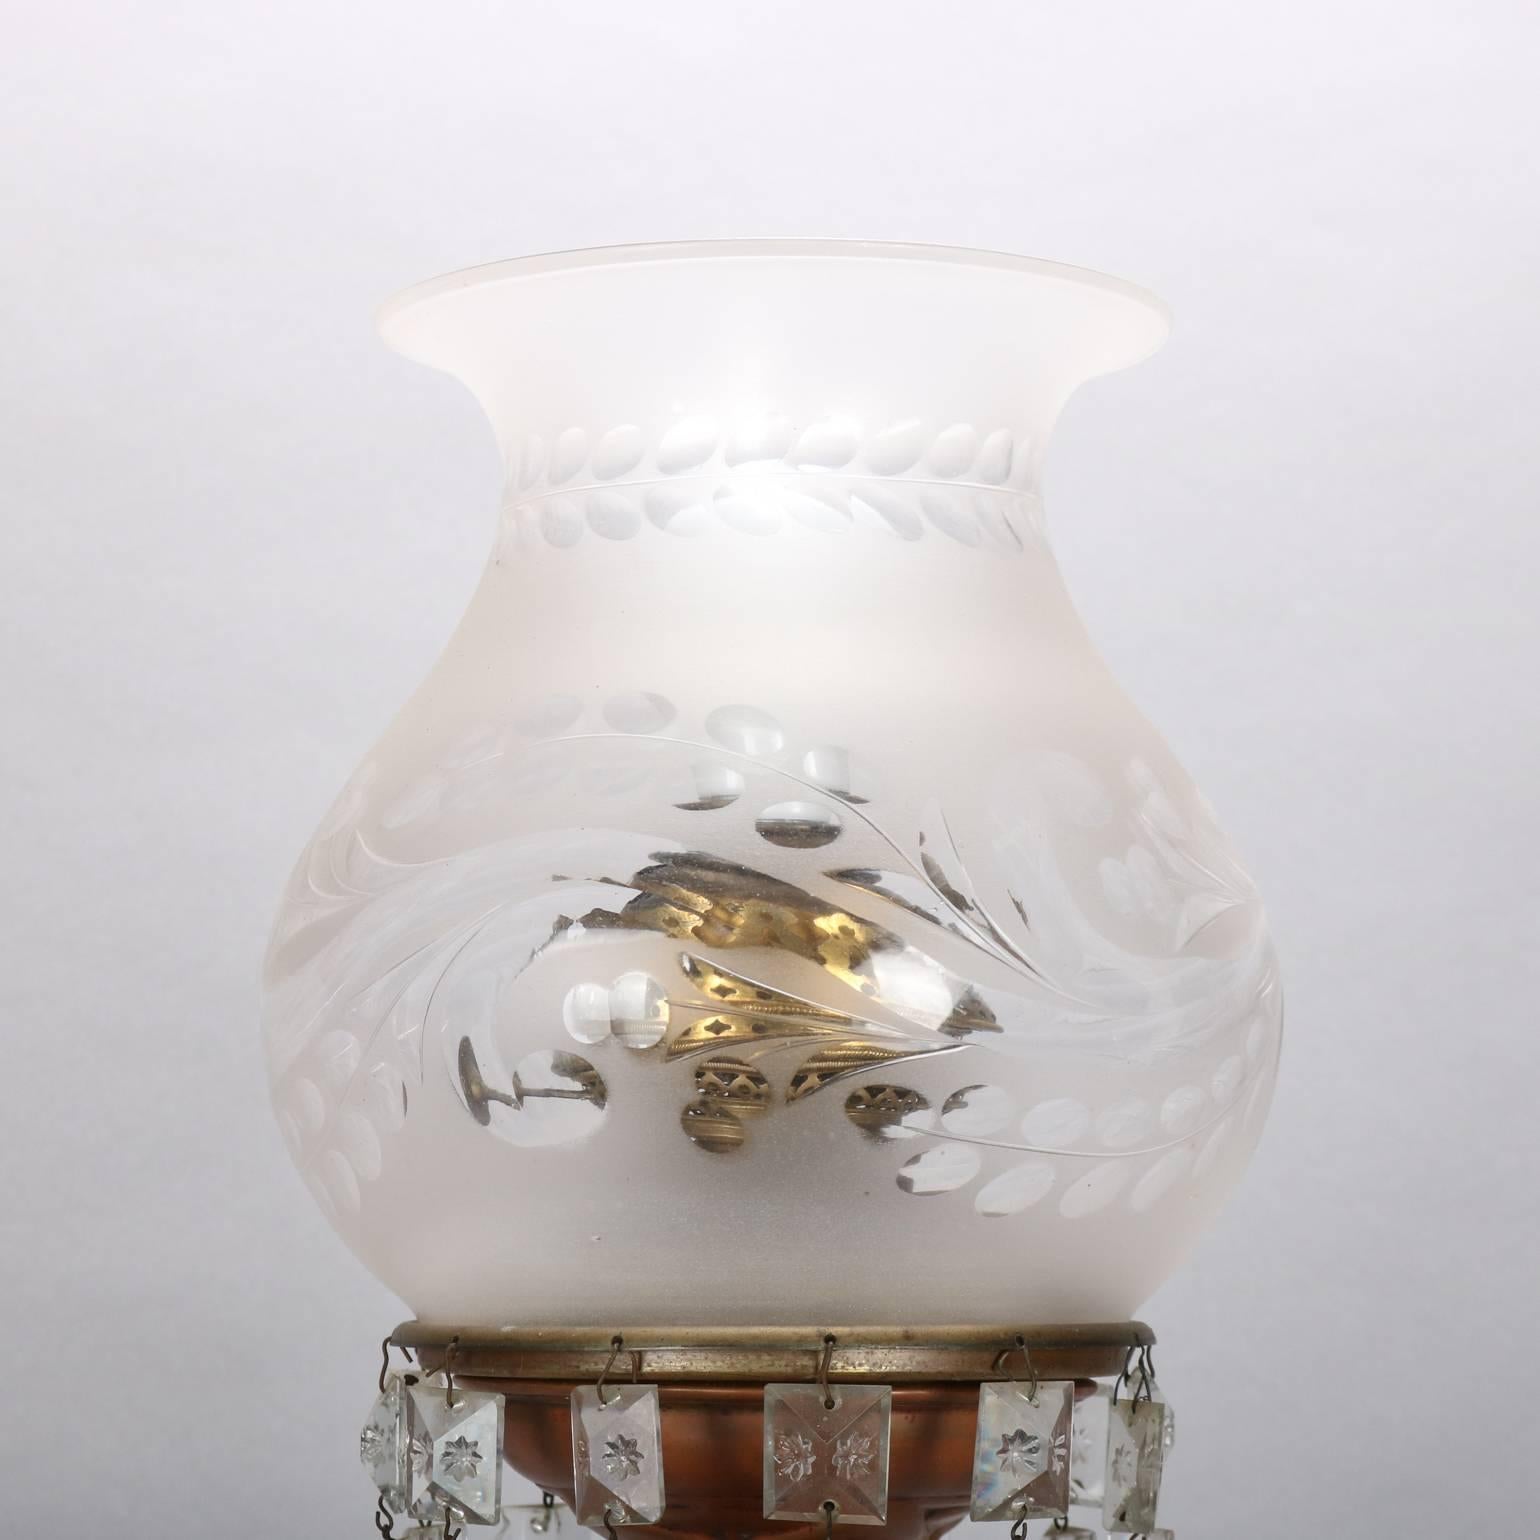 Etched Antique Brass, Crystal & Marble Electrified Solar Table Lamp, The Arctic MB Co.